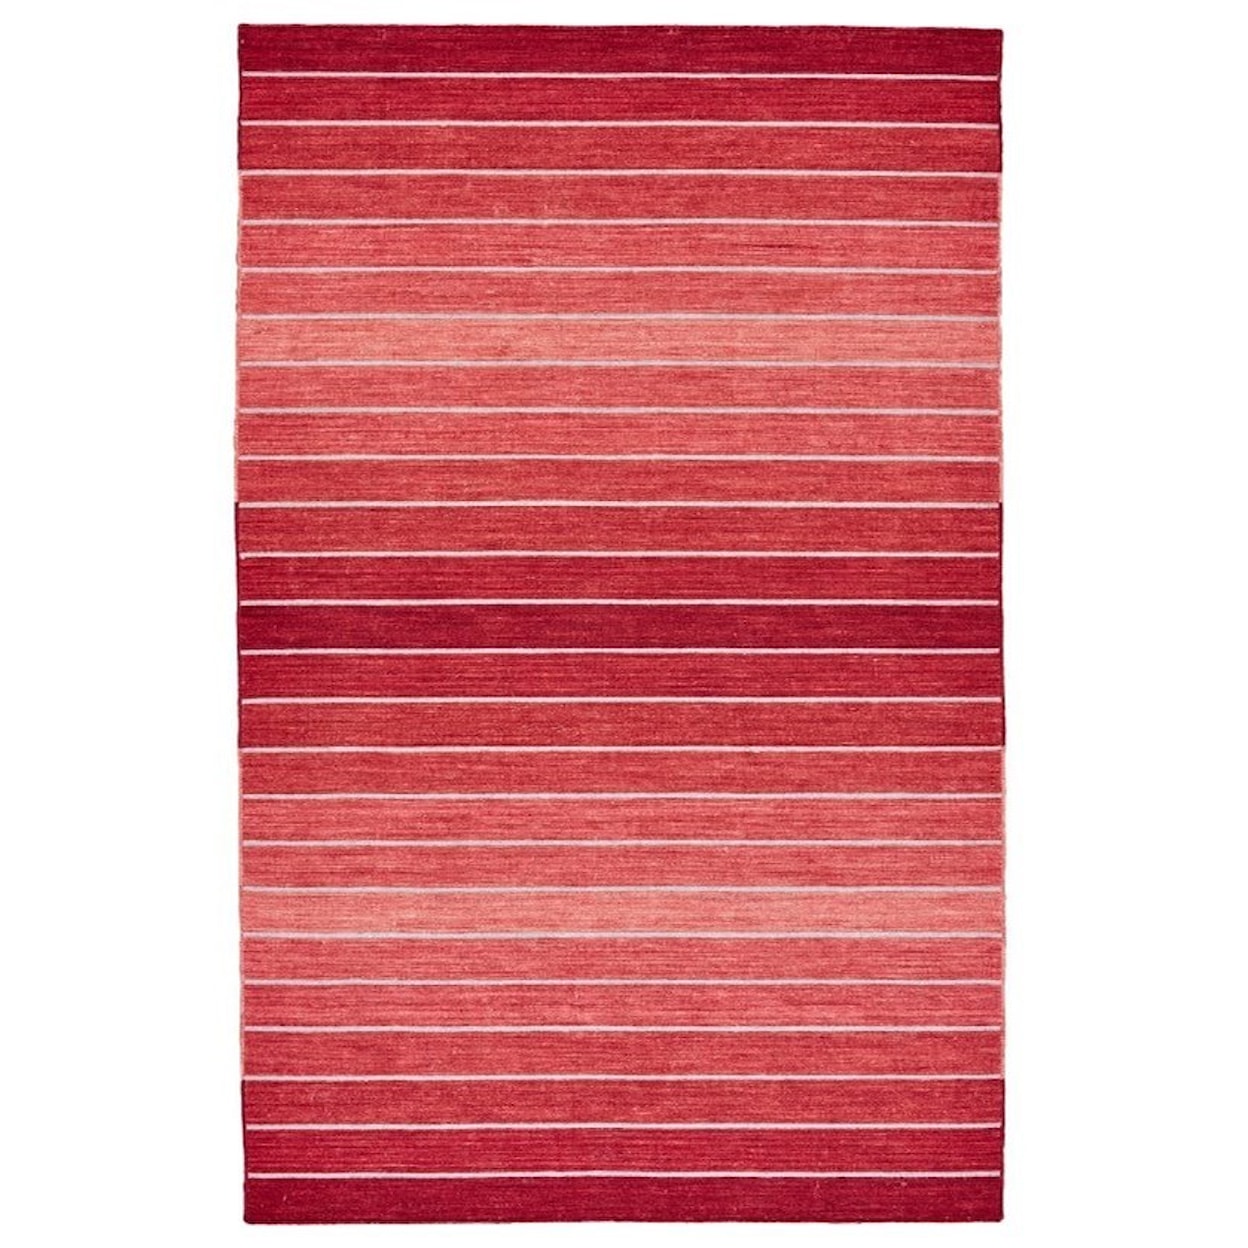 Feizy Rugs Santino Red 9'-6" x 13'-6" Area Rug